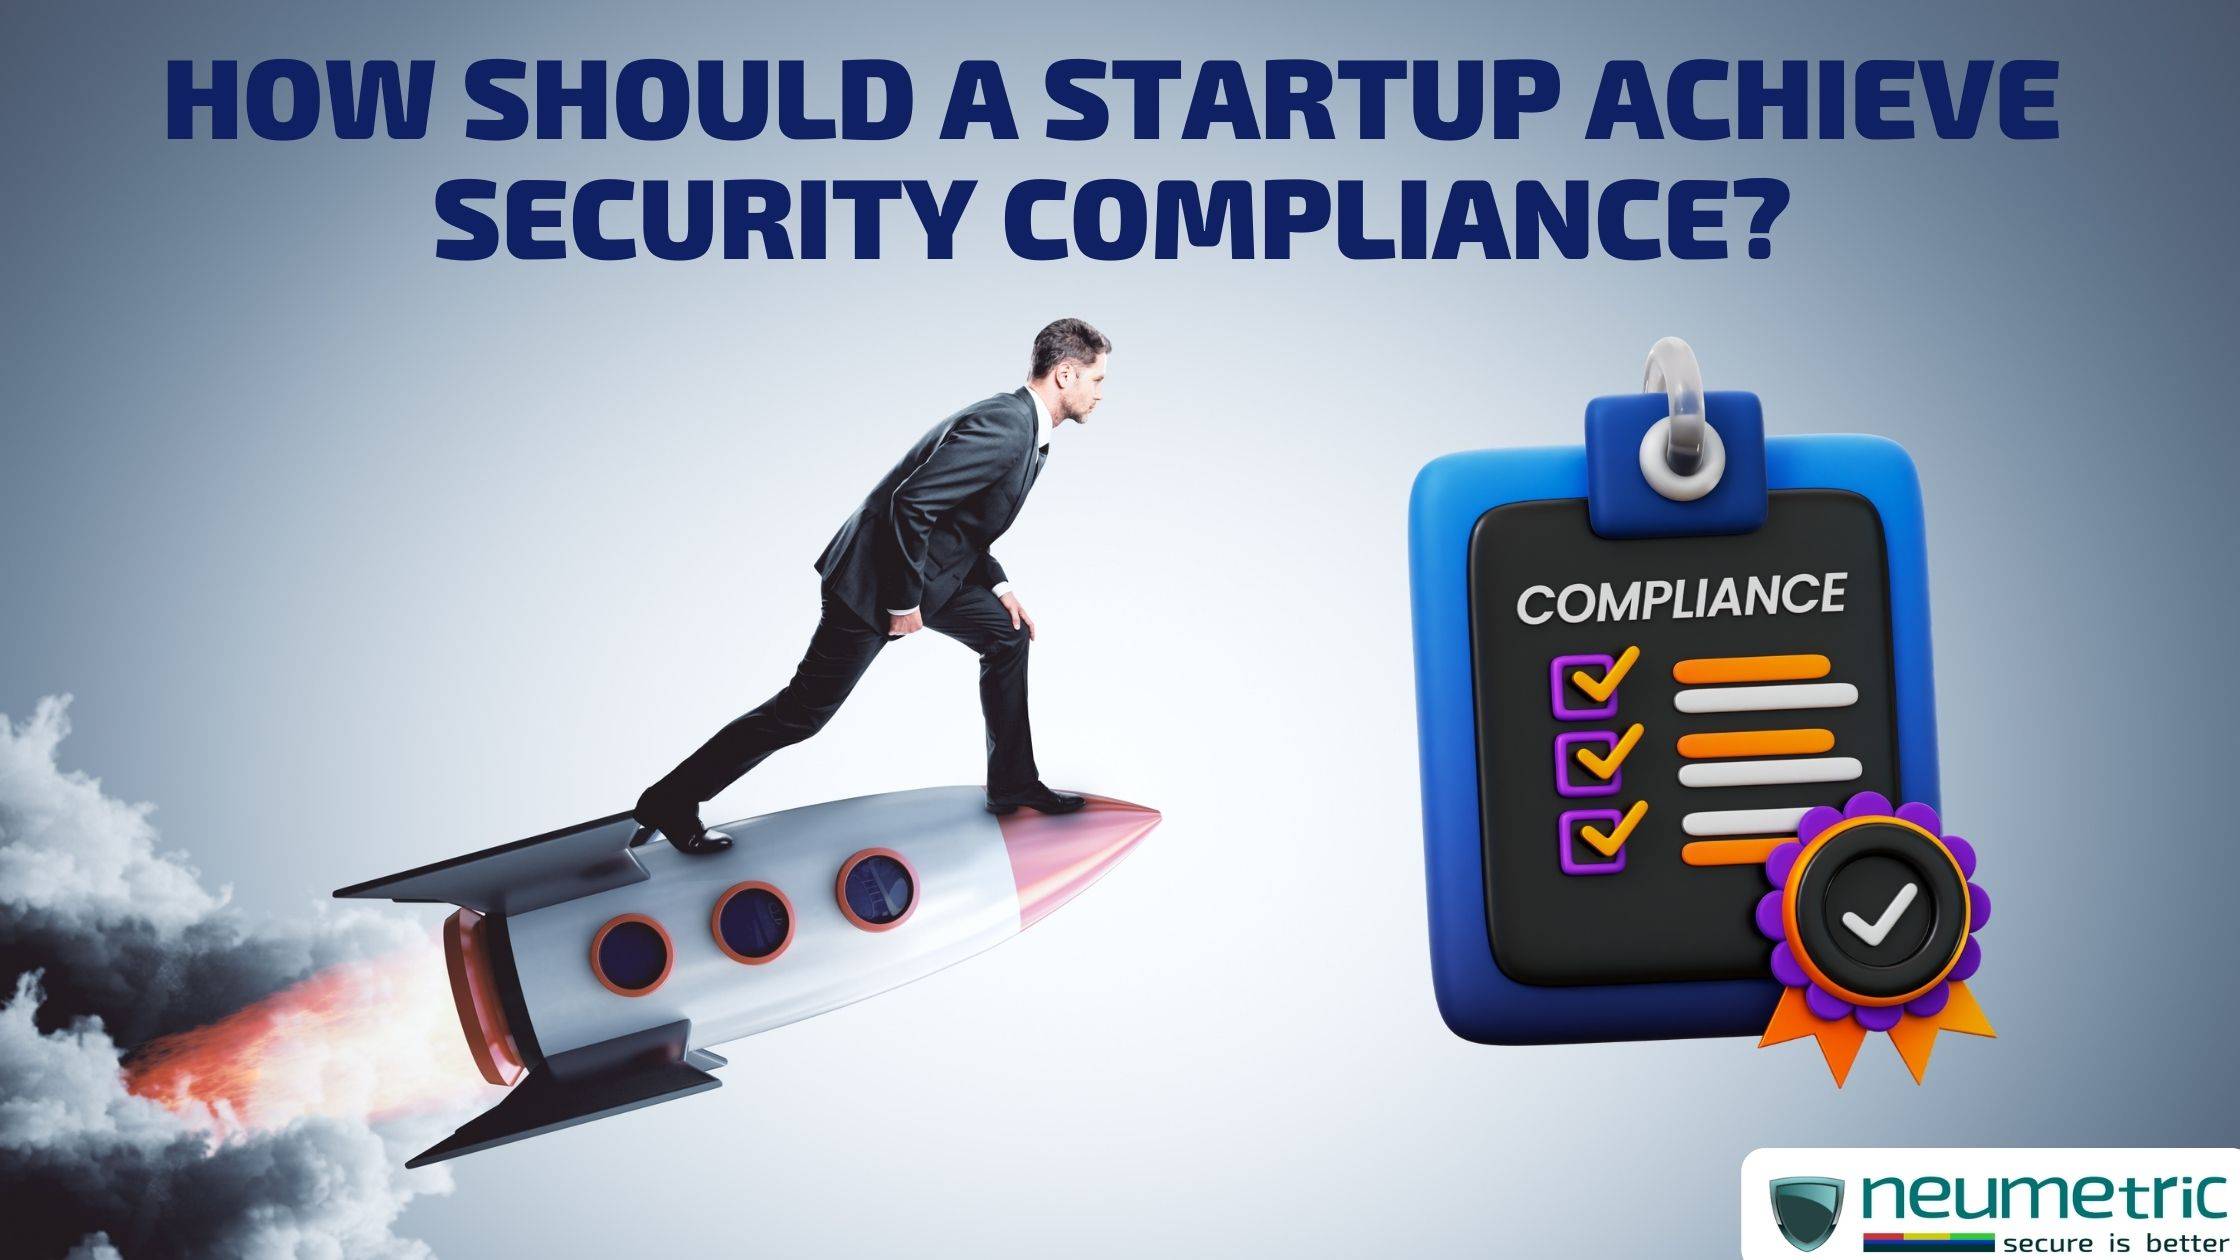 How should a startup achieve security compliance?